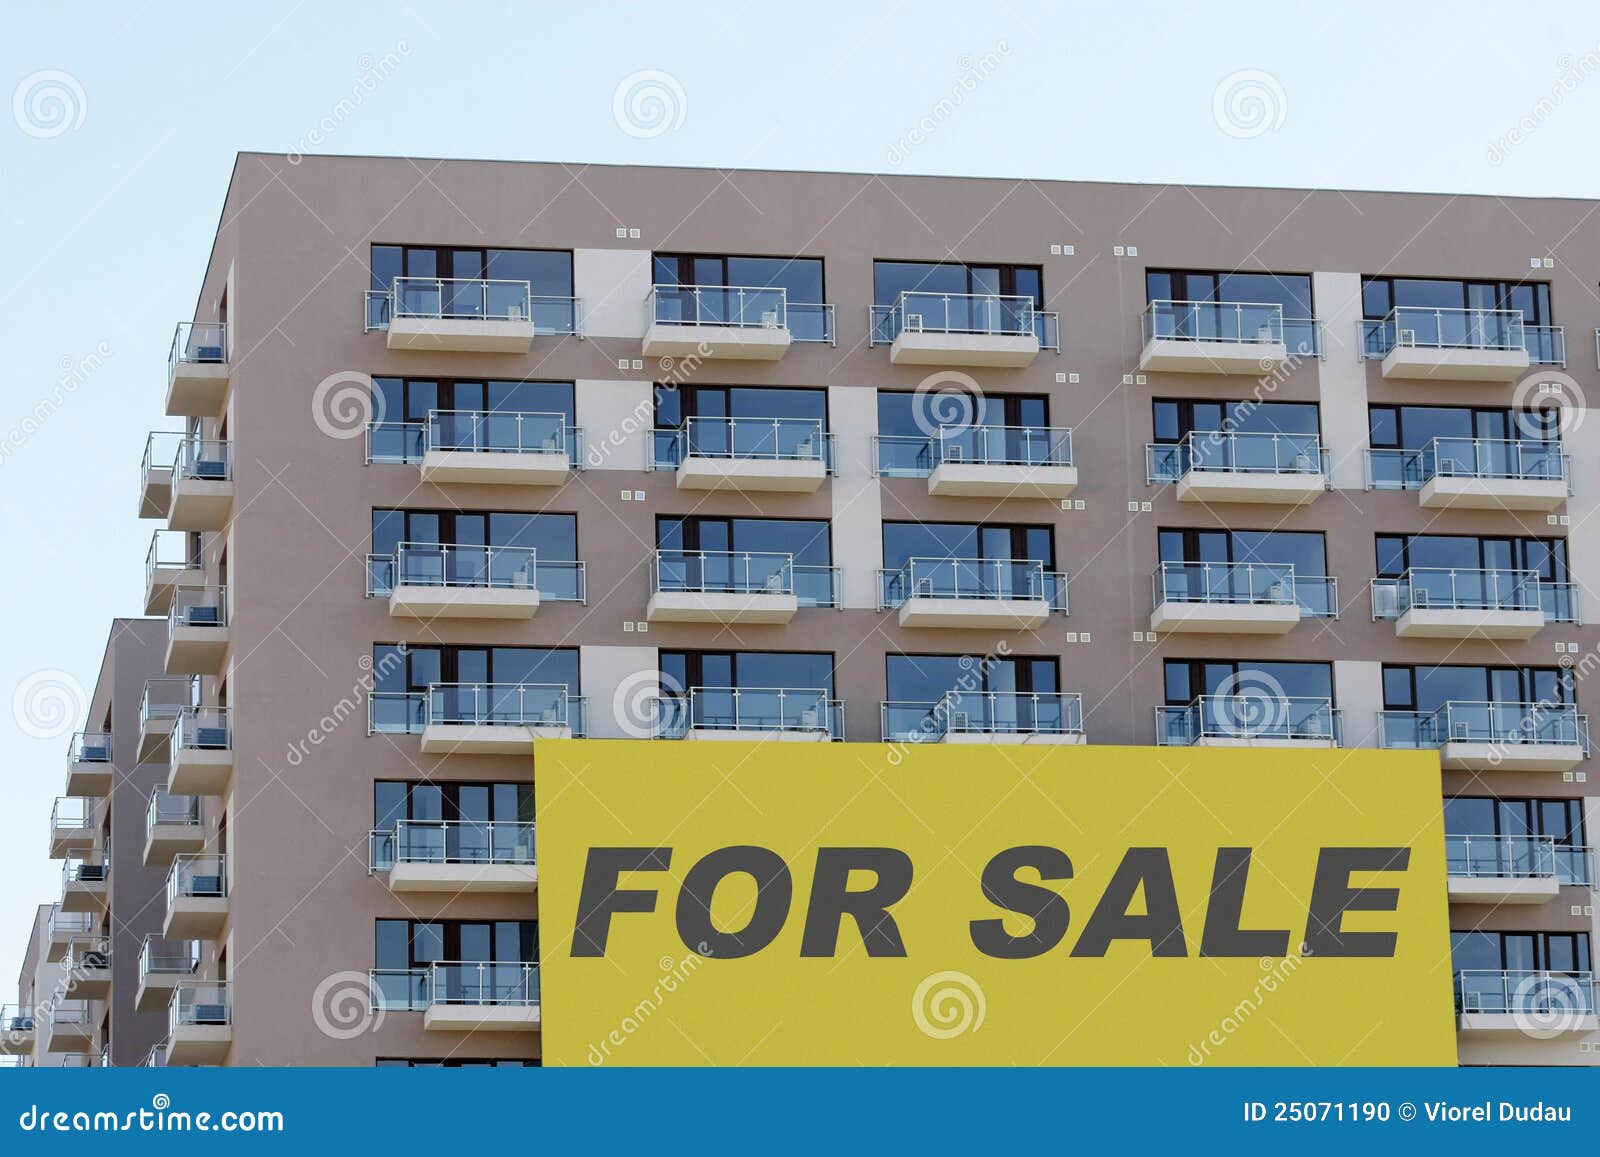 apartments for sale